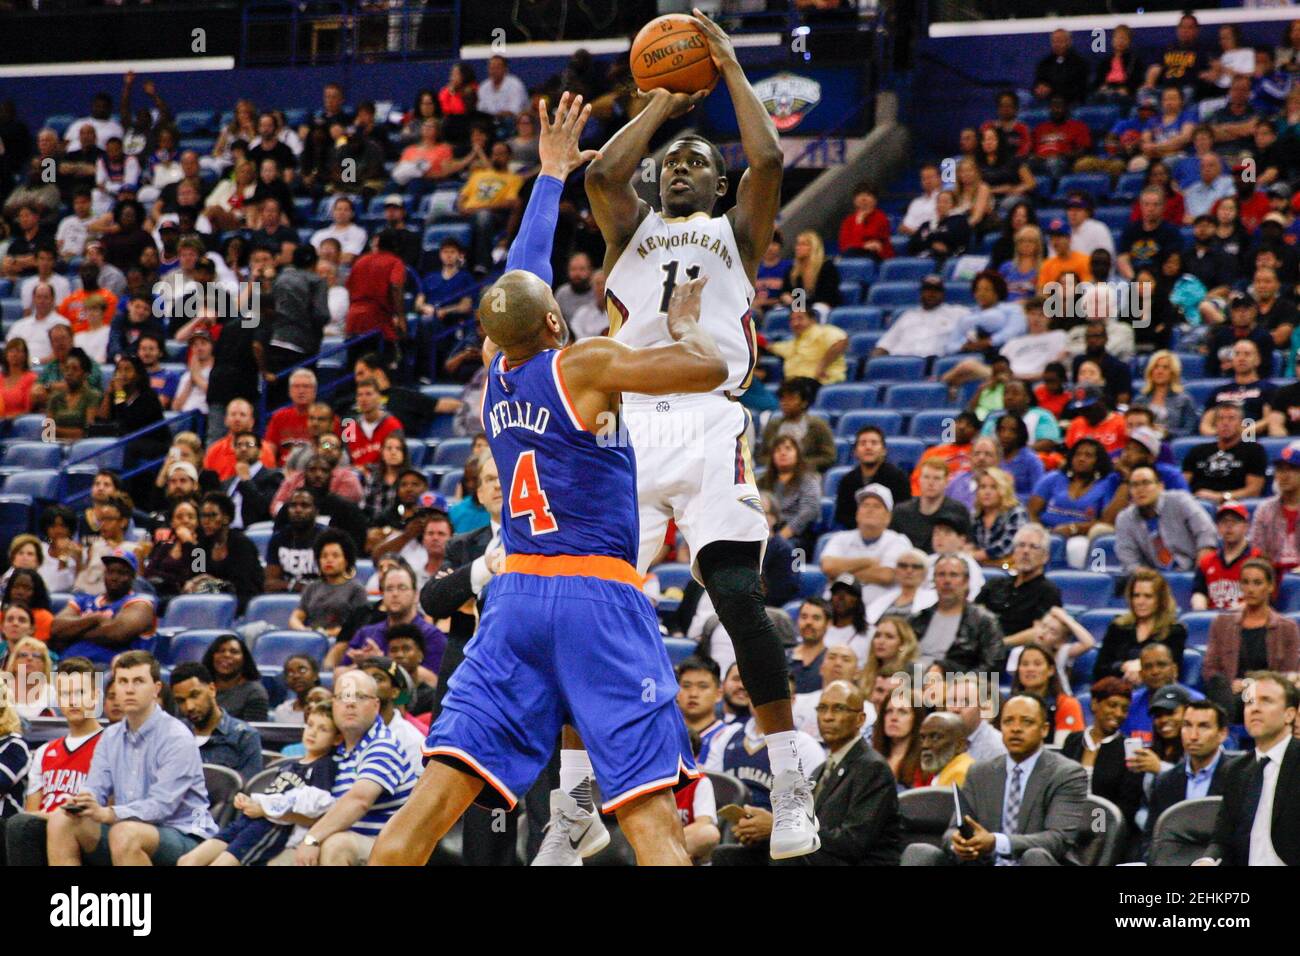 Mar 28, 2016; New Orleans, LA, USA; New Orleans Pelicans guard Jrue Holiday (11) shoots over New York Knicks guard Arron Afflalo (4) during the second half of a game at the Smoothie King Center. The Pelicans defeated the Knicks 99-91. Mandatory Credit: Derick E. Hingle-USA TODAY Sports  / Reuters  Picture Supplied by Action Images   (TAGS: Sport Basketball NBA) *** Local Caption *** 2016-03-29T030940Z 872434843 NOCID RTRMADP 3 NBA-NEW-YORK-KNICKS-AT-NEW-ORLEANS-PELICANS.JPG Stock Photo